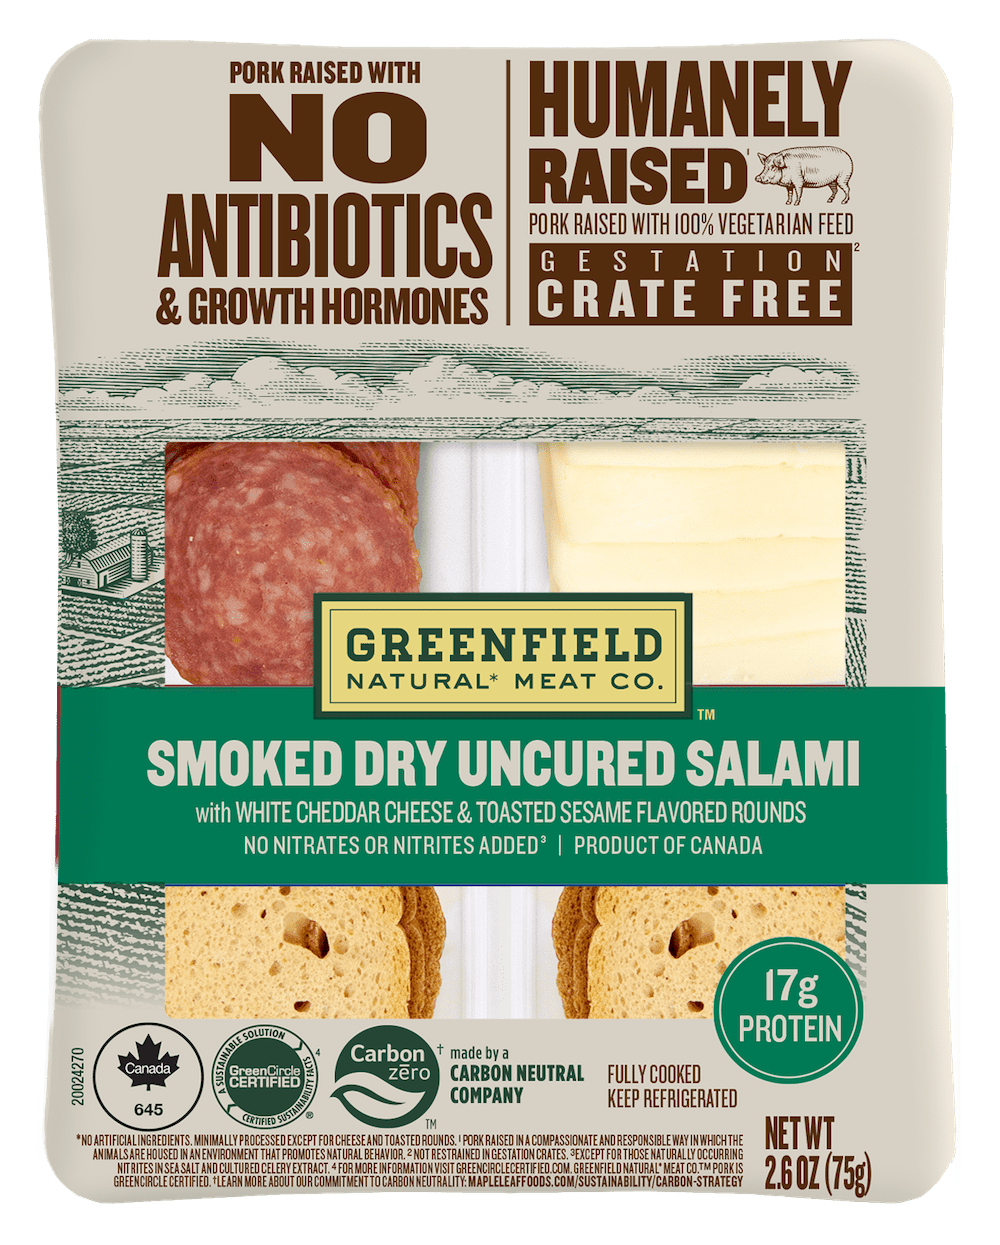 Smoked Dry Uncured Salami Lunch Kit